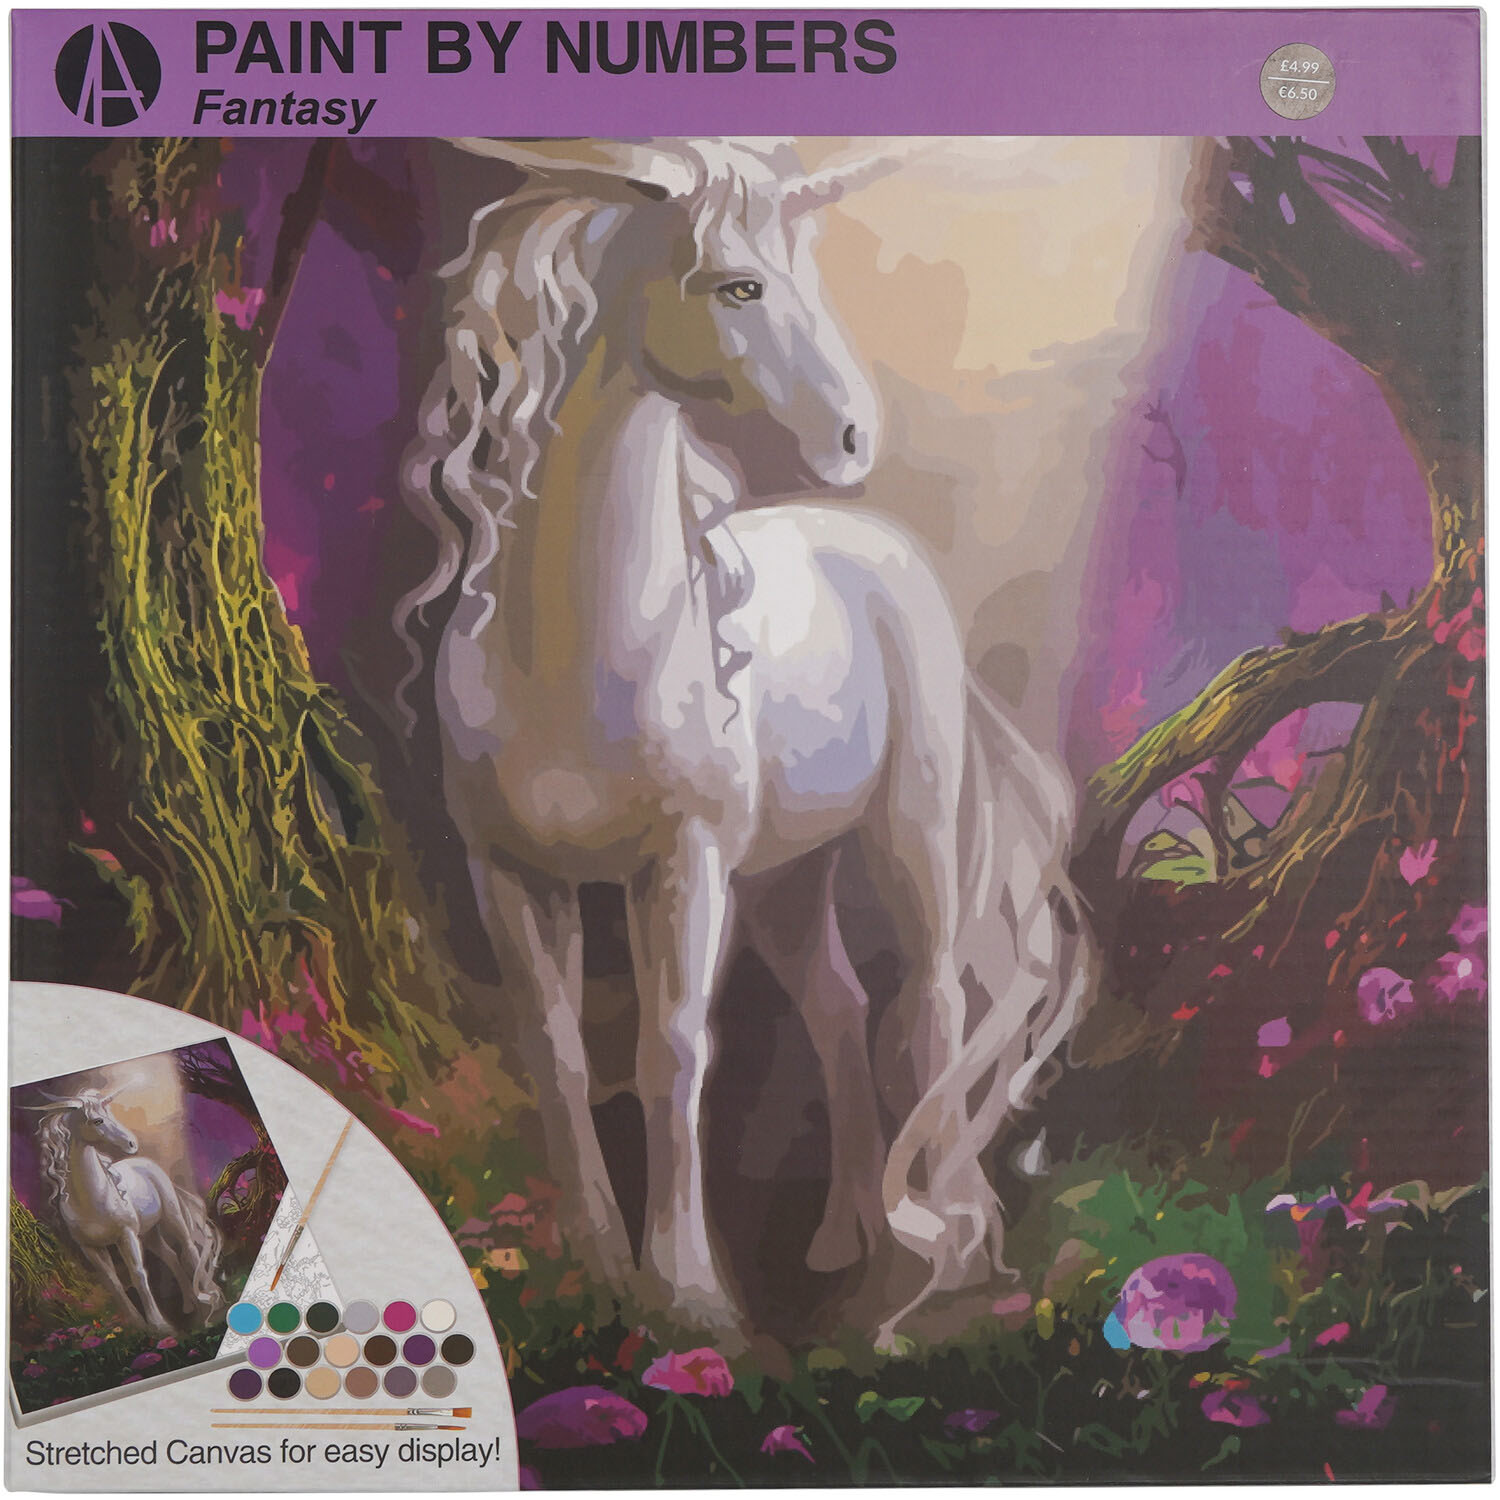 Paint by Numbers Fantasy Image 1